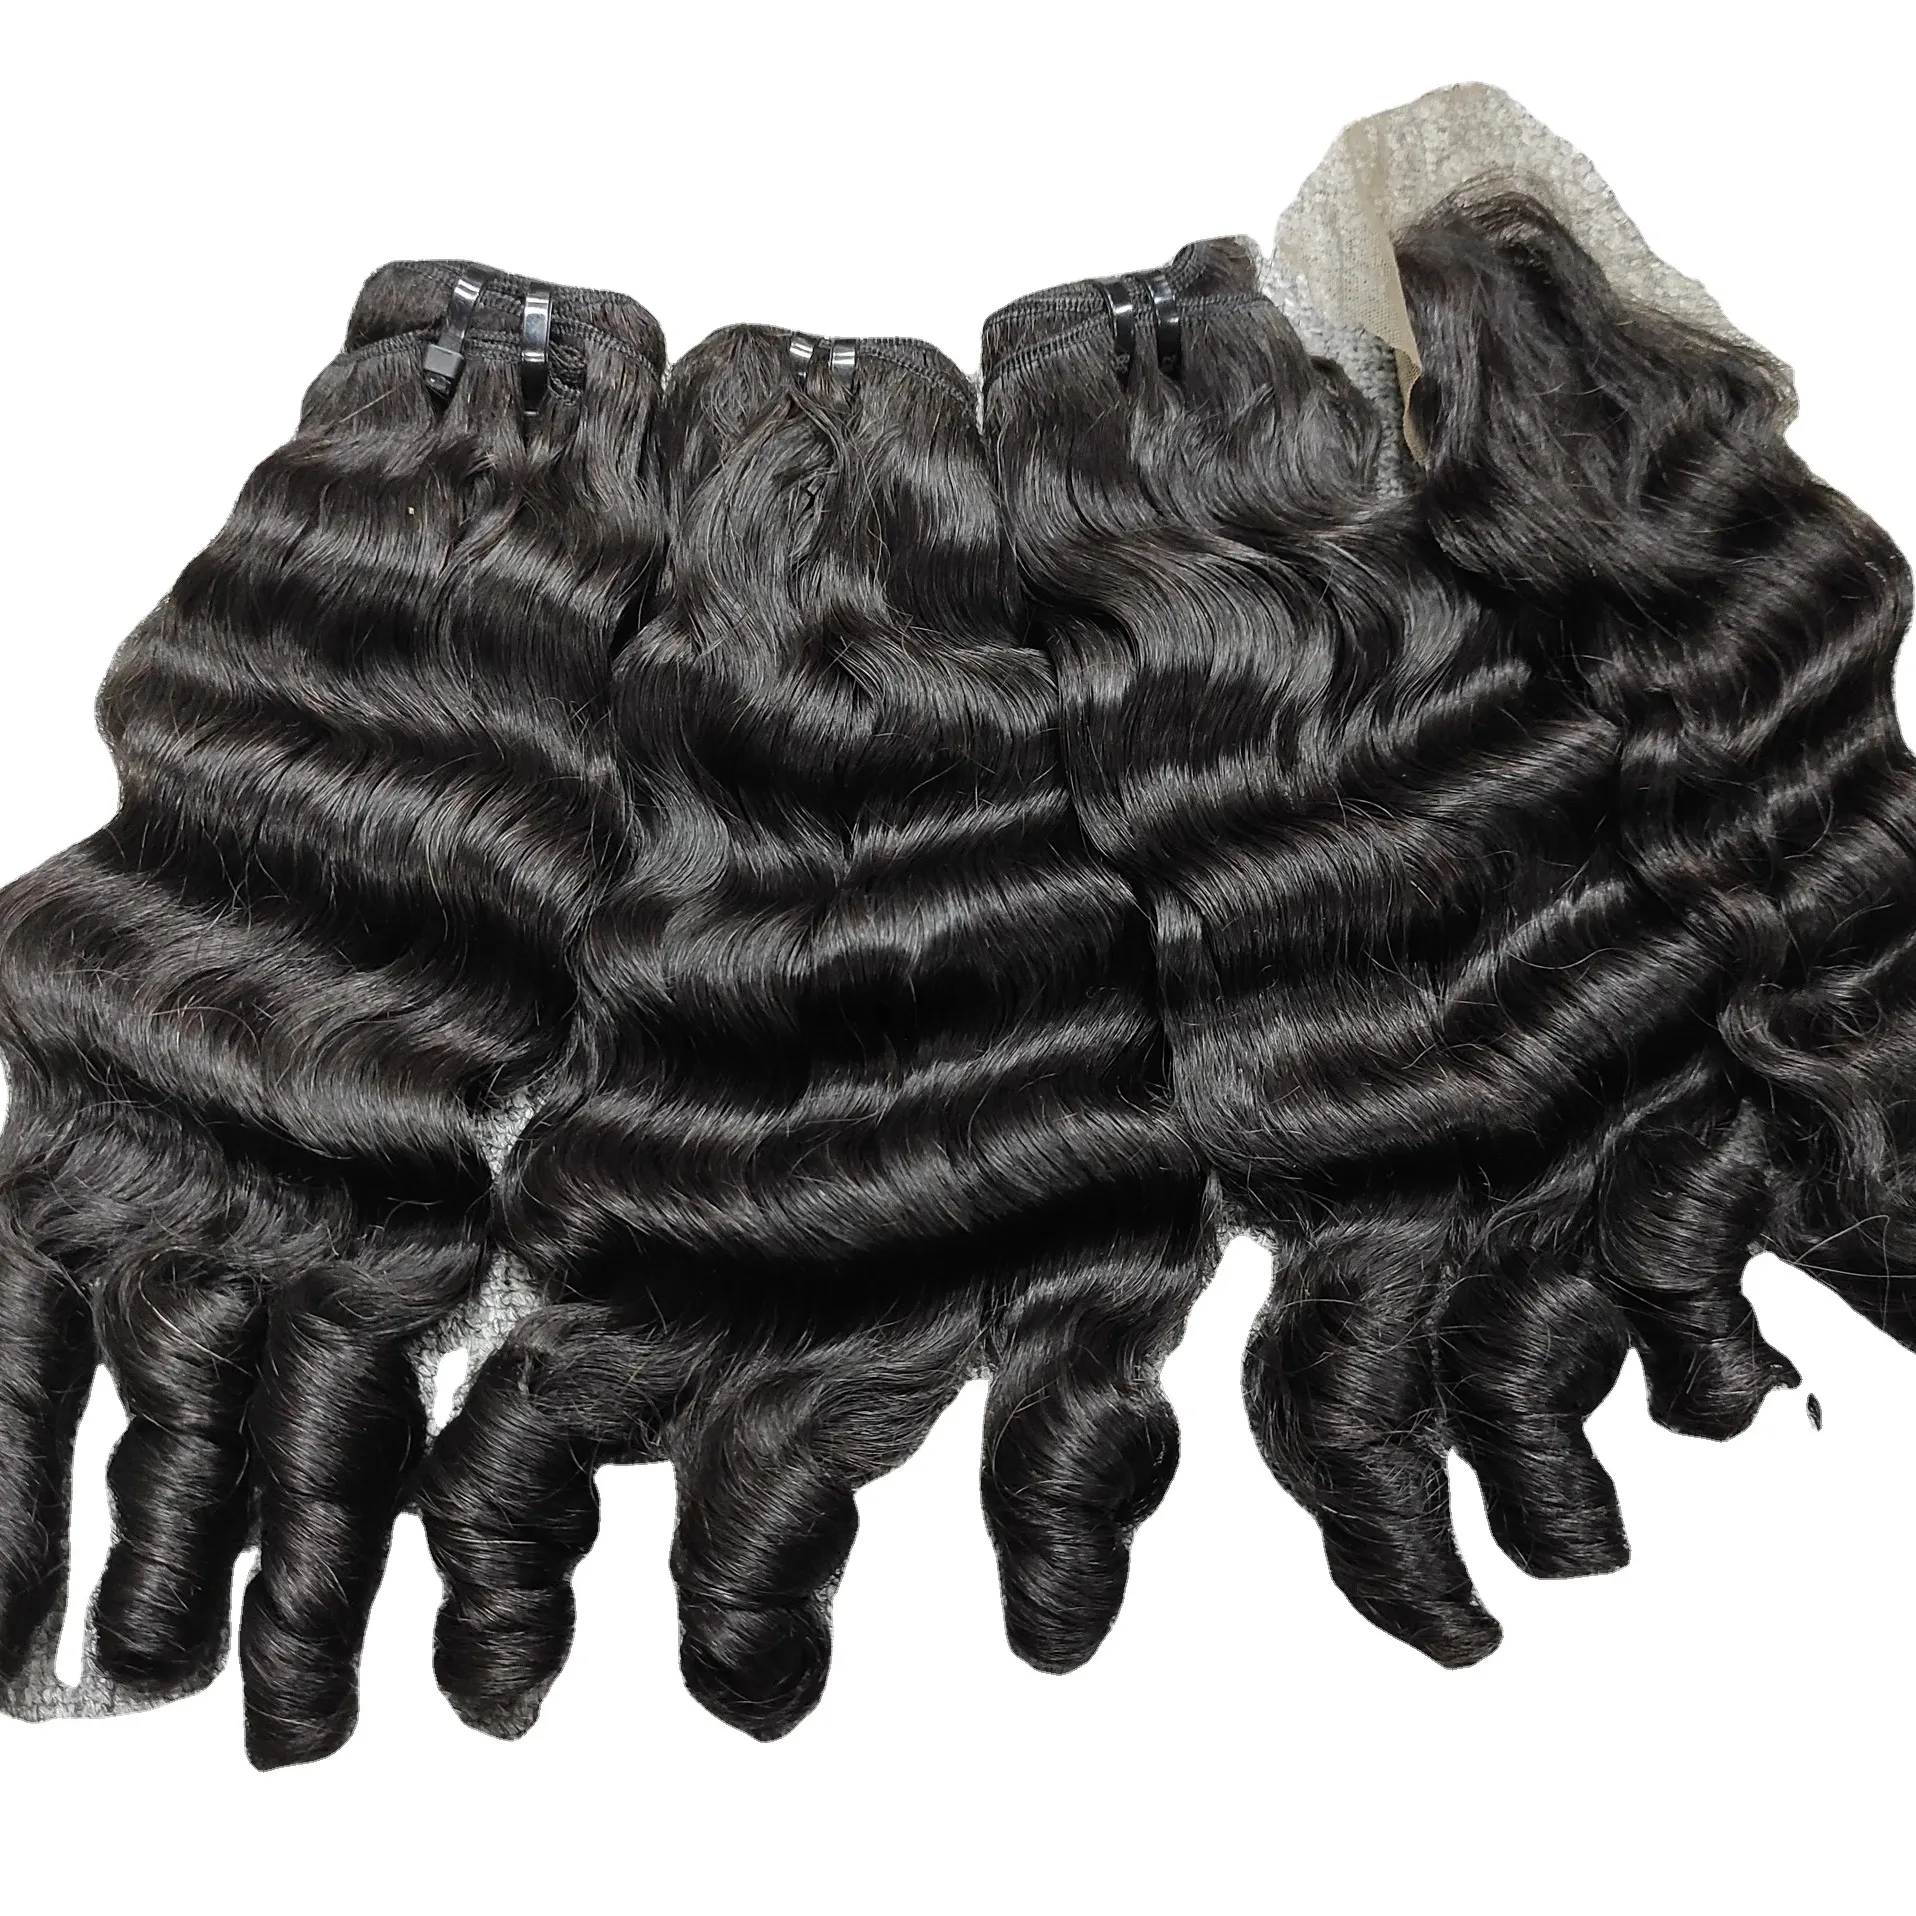 Best Seller Natural Virgin Human Hair Curly and Wavy for Black Women in US in Wholesale Price